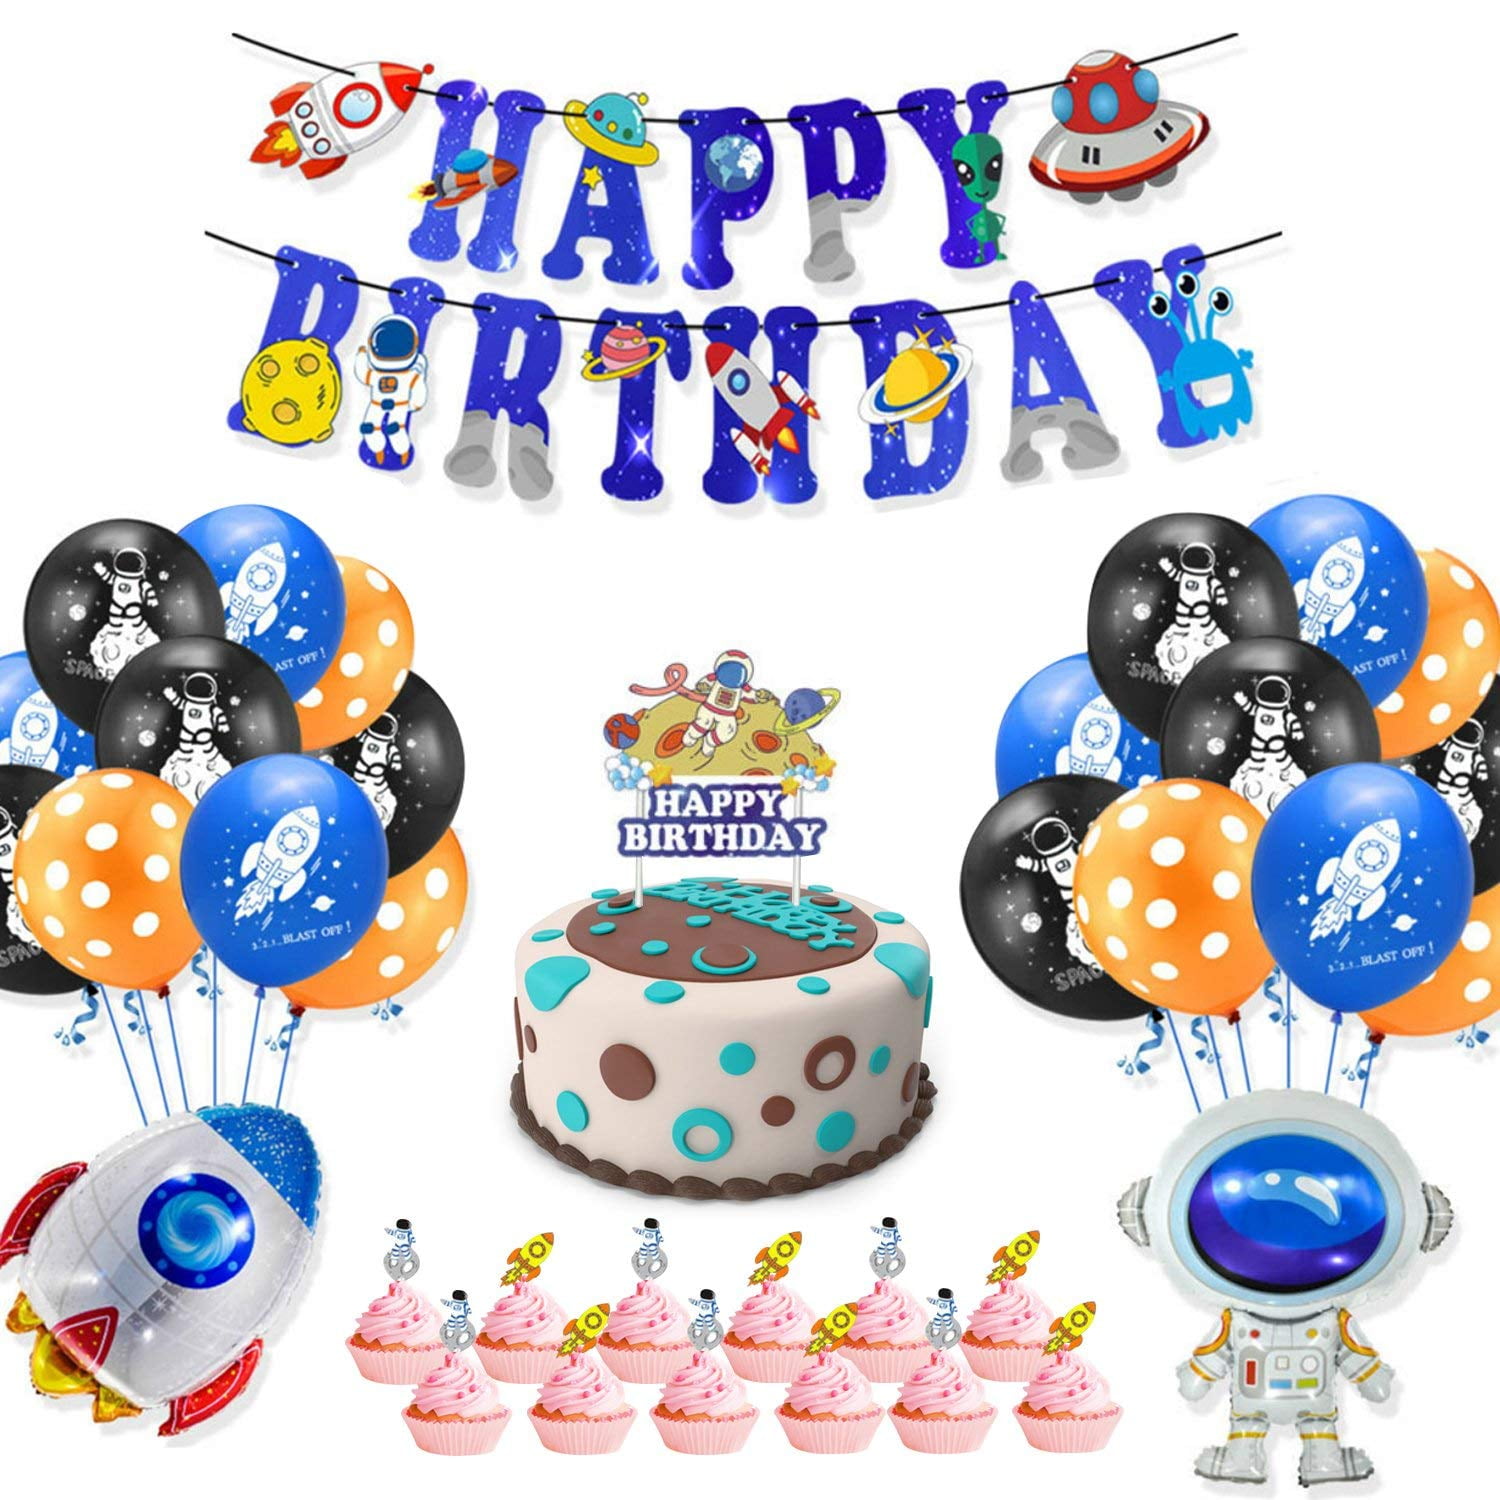 Birthday Decorations,Birthday Party Decorations Kit,Happy Birthday Party Decoration Supplies 41 Packs with 1 Happy Birthday Banner,1 Star Ornaments 30 Pack Balloons and 9 Pack Tissue Poms 